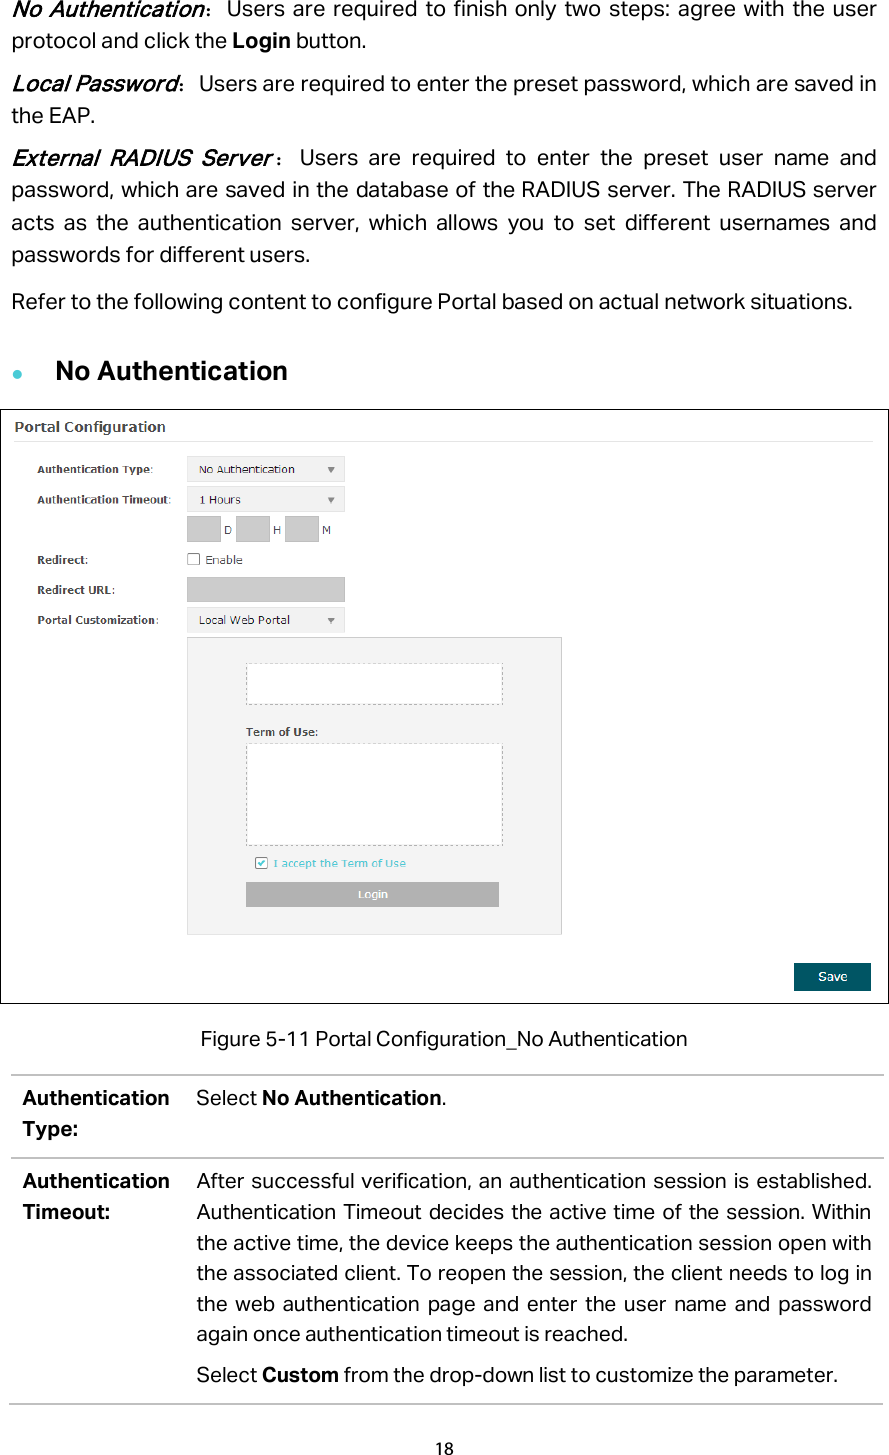 No  Authentication：Users are required to finish only two steps: agree with the user protocol and click the Login button. Local Password：Users are required to enter the preset password, which are saved in the EAP. External RADIUS Server：Users are required to enter the preset user name and password, which are saved in the database of the RADIUS server. The RADIUS server acts as the authentication server, which allows you to set different usernames and passwords for different users. Refer to the following content to configure Portal based on actual network situations.  No Authentication  Figure 5-11 Portal Configuration_No Authentication Authentication Type: Select No Authentication. Authentication Timeout: After successful verification, an authentication session is established. Authentication Timeout decides the active time of the session. Within the active time, the device keeps the authentication session open with the associated client. To reopen the session, the client needs to log in the web authentication page and enter the user name and password again once authentication timeout is reached. Select Custom from the drop-down list to customize the parameter.   18  